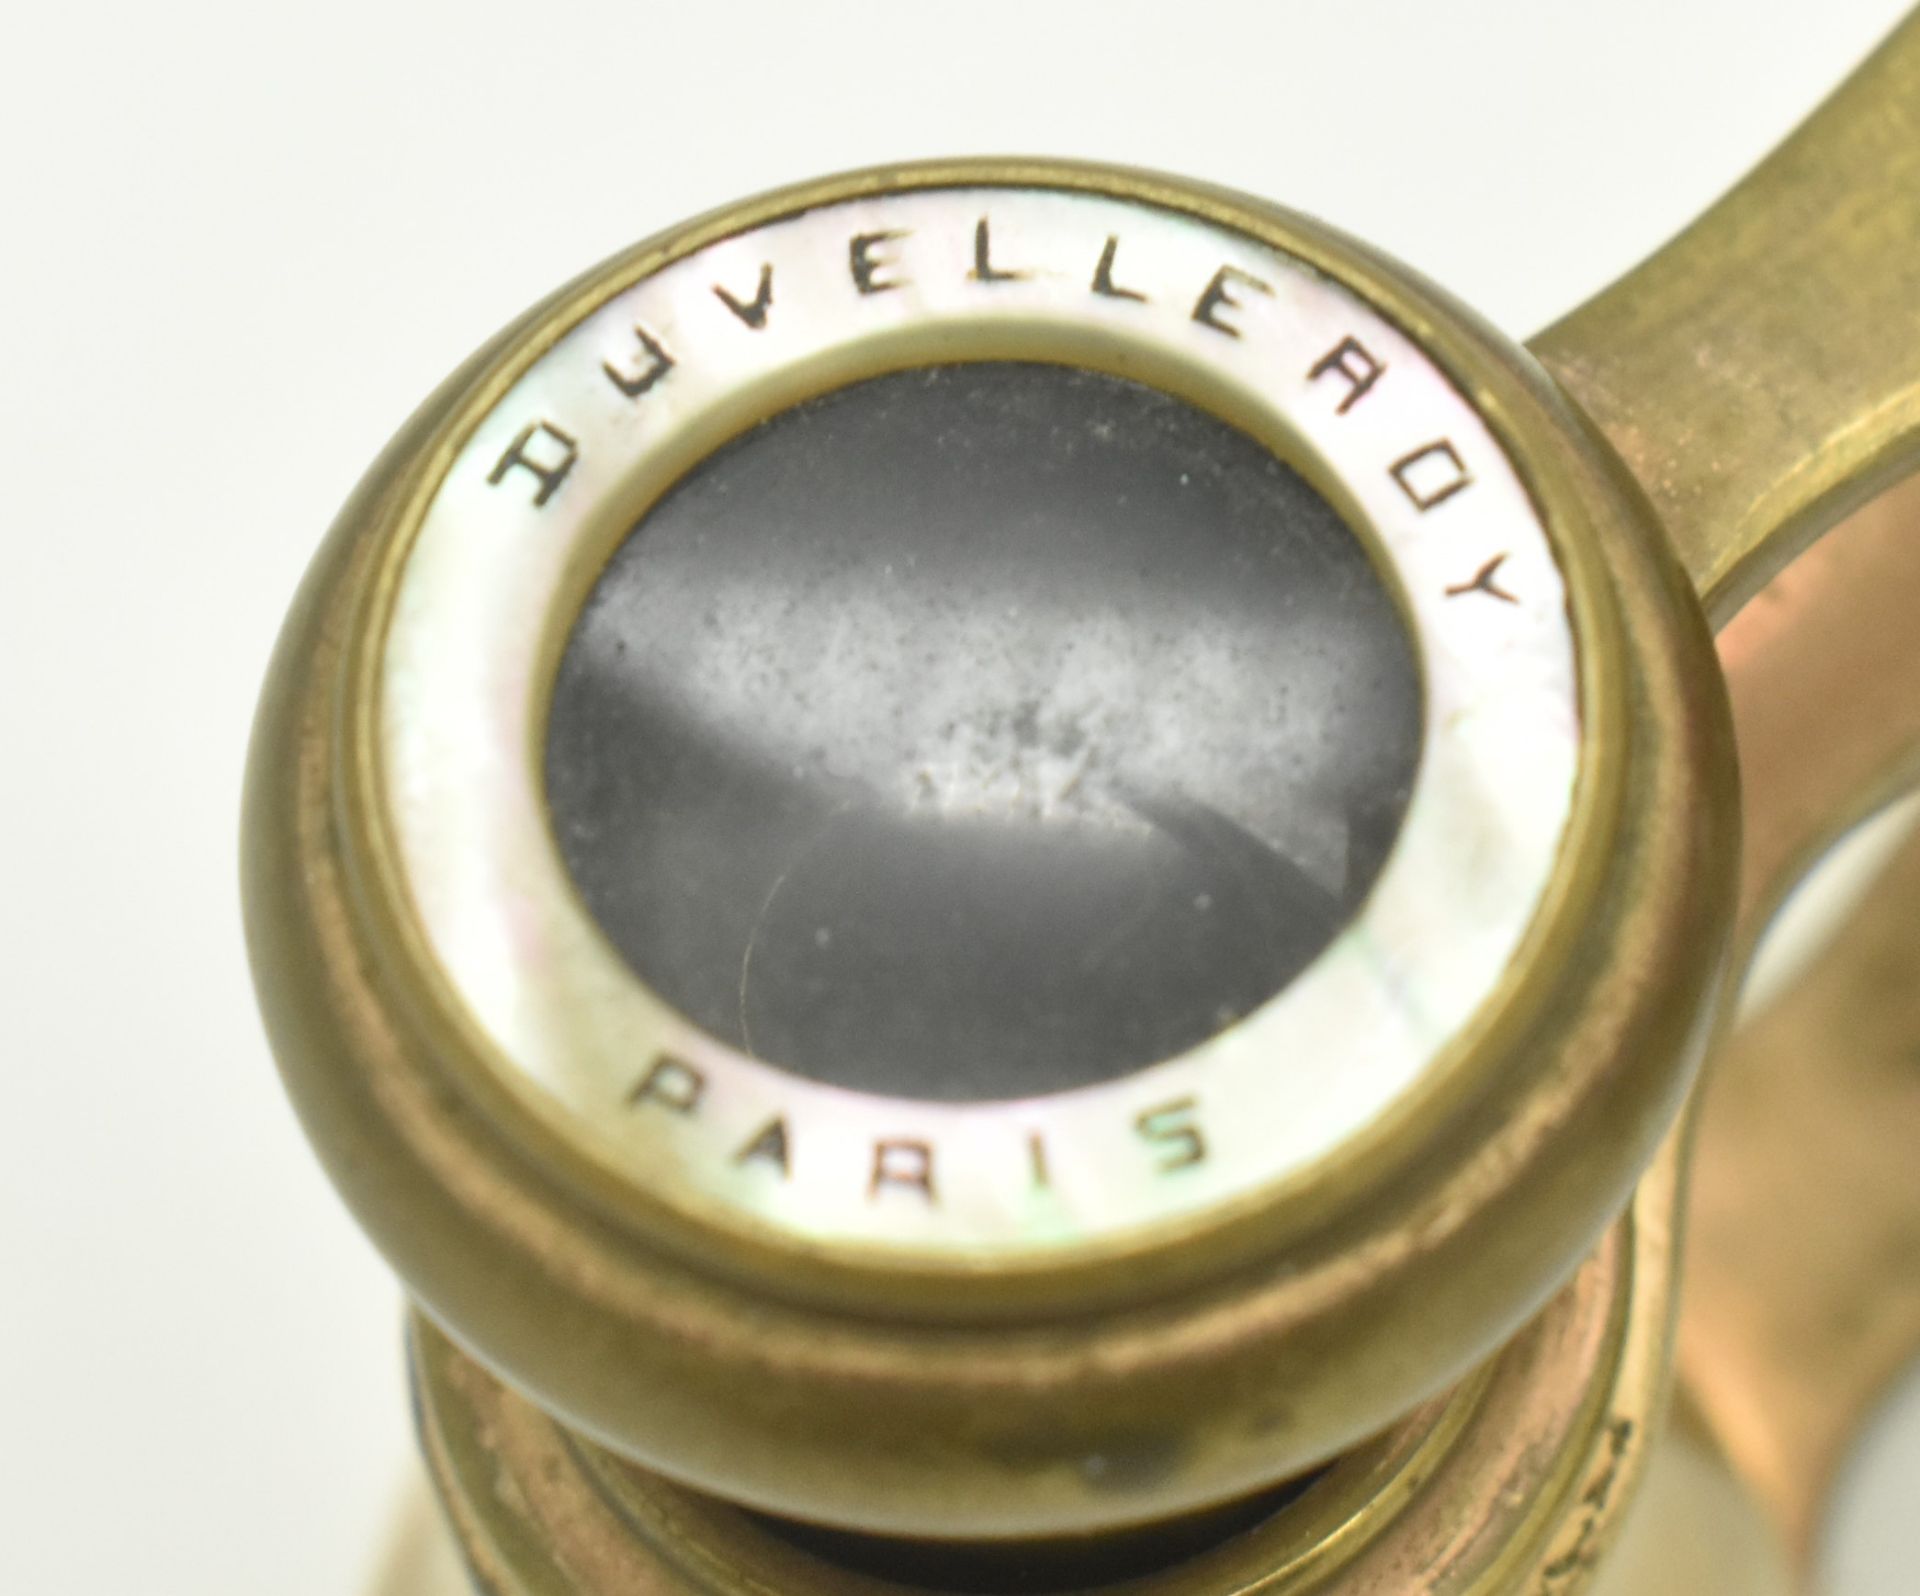 TWO PAIRS OF FRENCH MOTHER OF PEARL OPERA GLASSES - Image 4 of 7